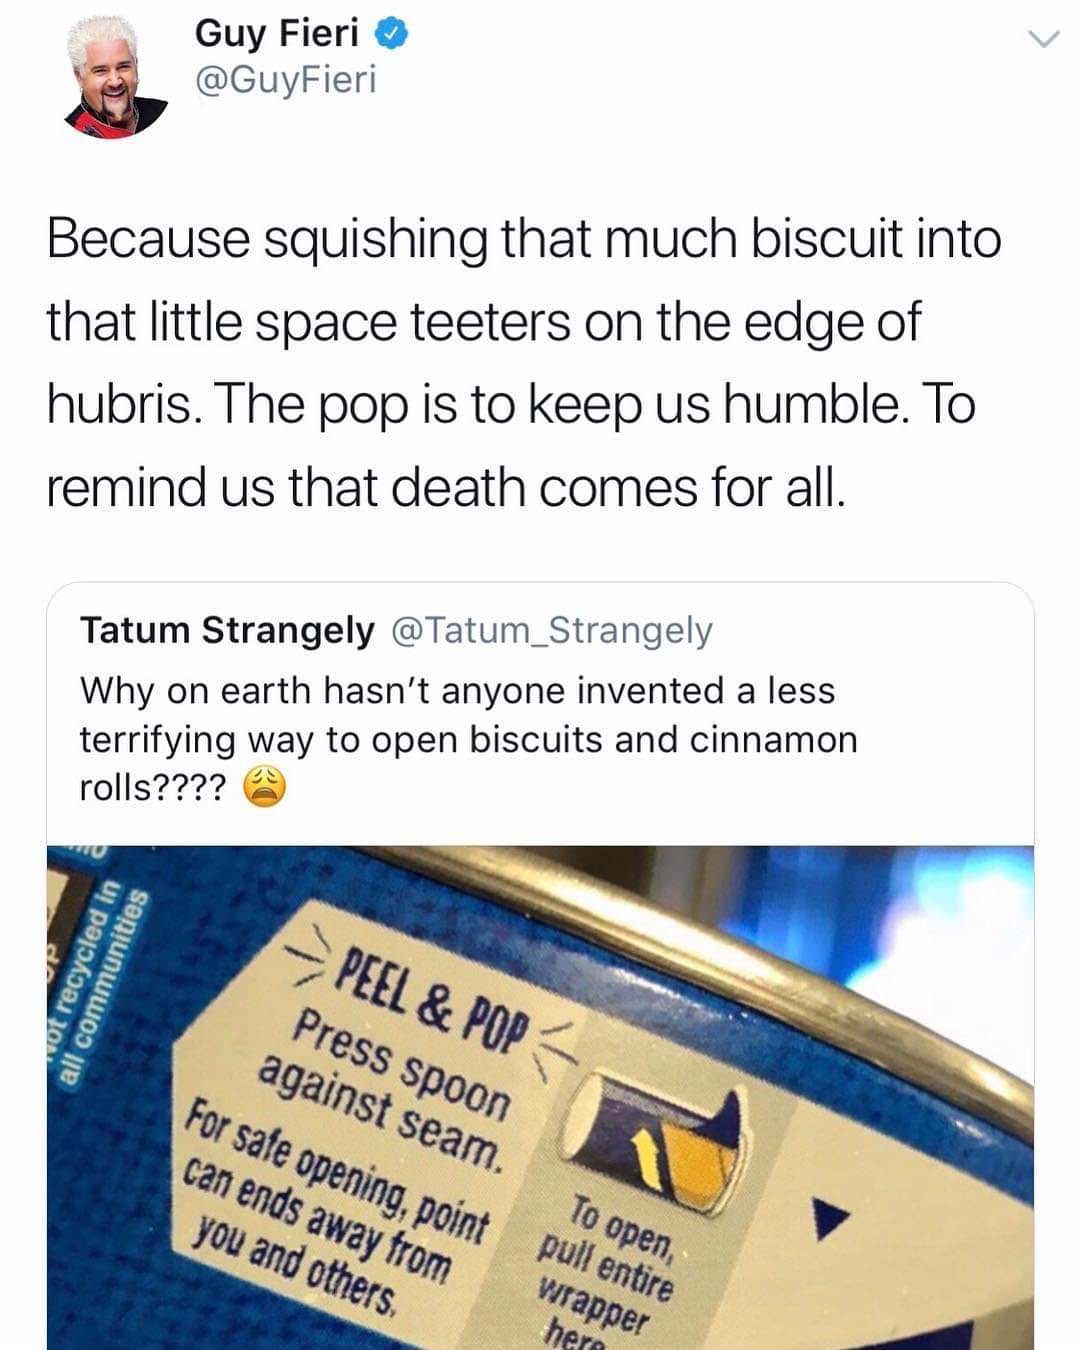 guy fieri biscuits - Guy Fieri Because squishing that much biscuit into that little space teeters on the edge of hubris. The pop is to keep us humble. To remind us that death comes for all. Tatum Strangely Why on earth hasn't anyone invented a less terrif